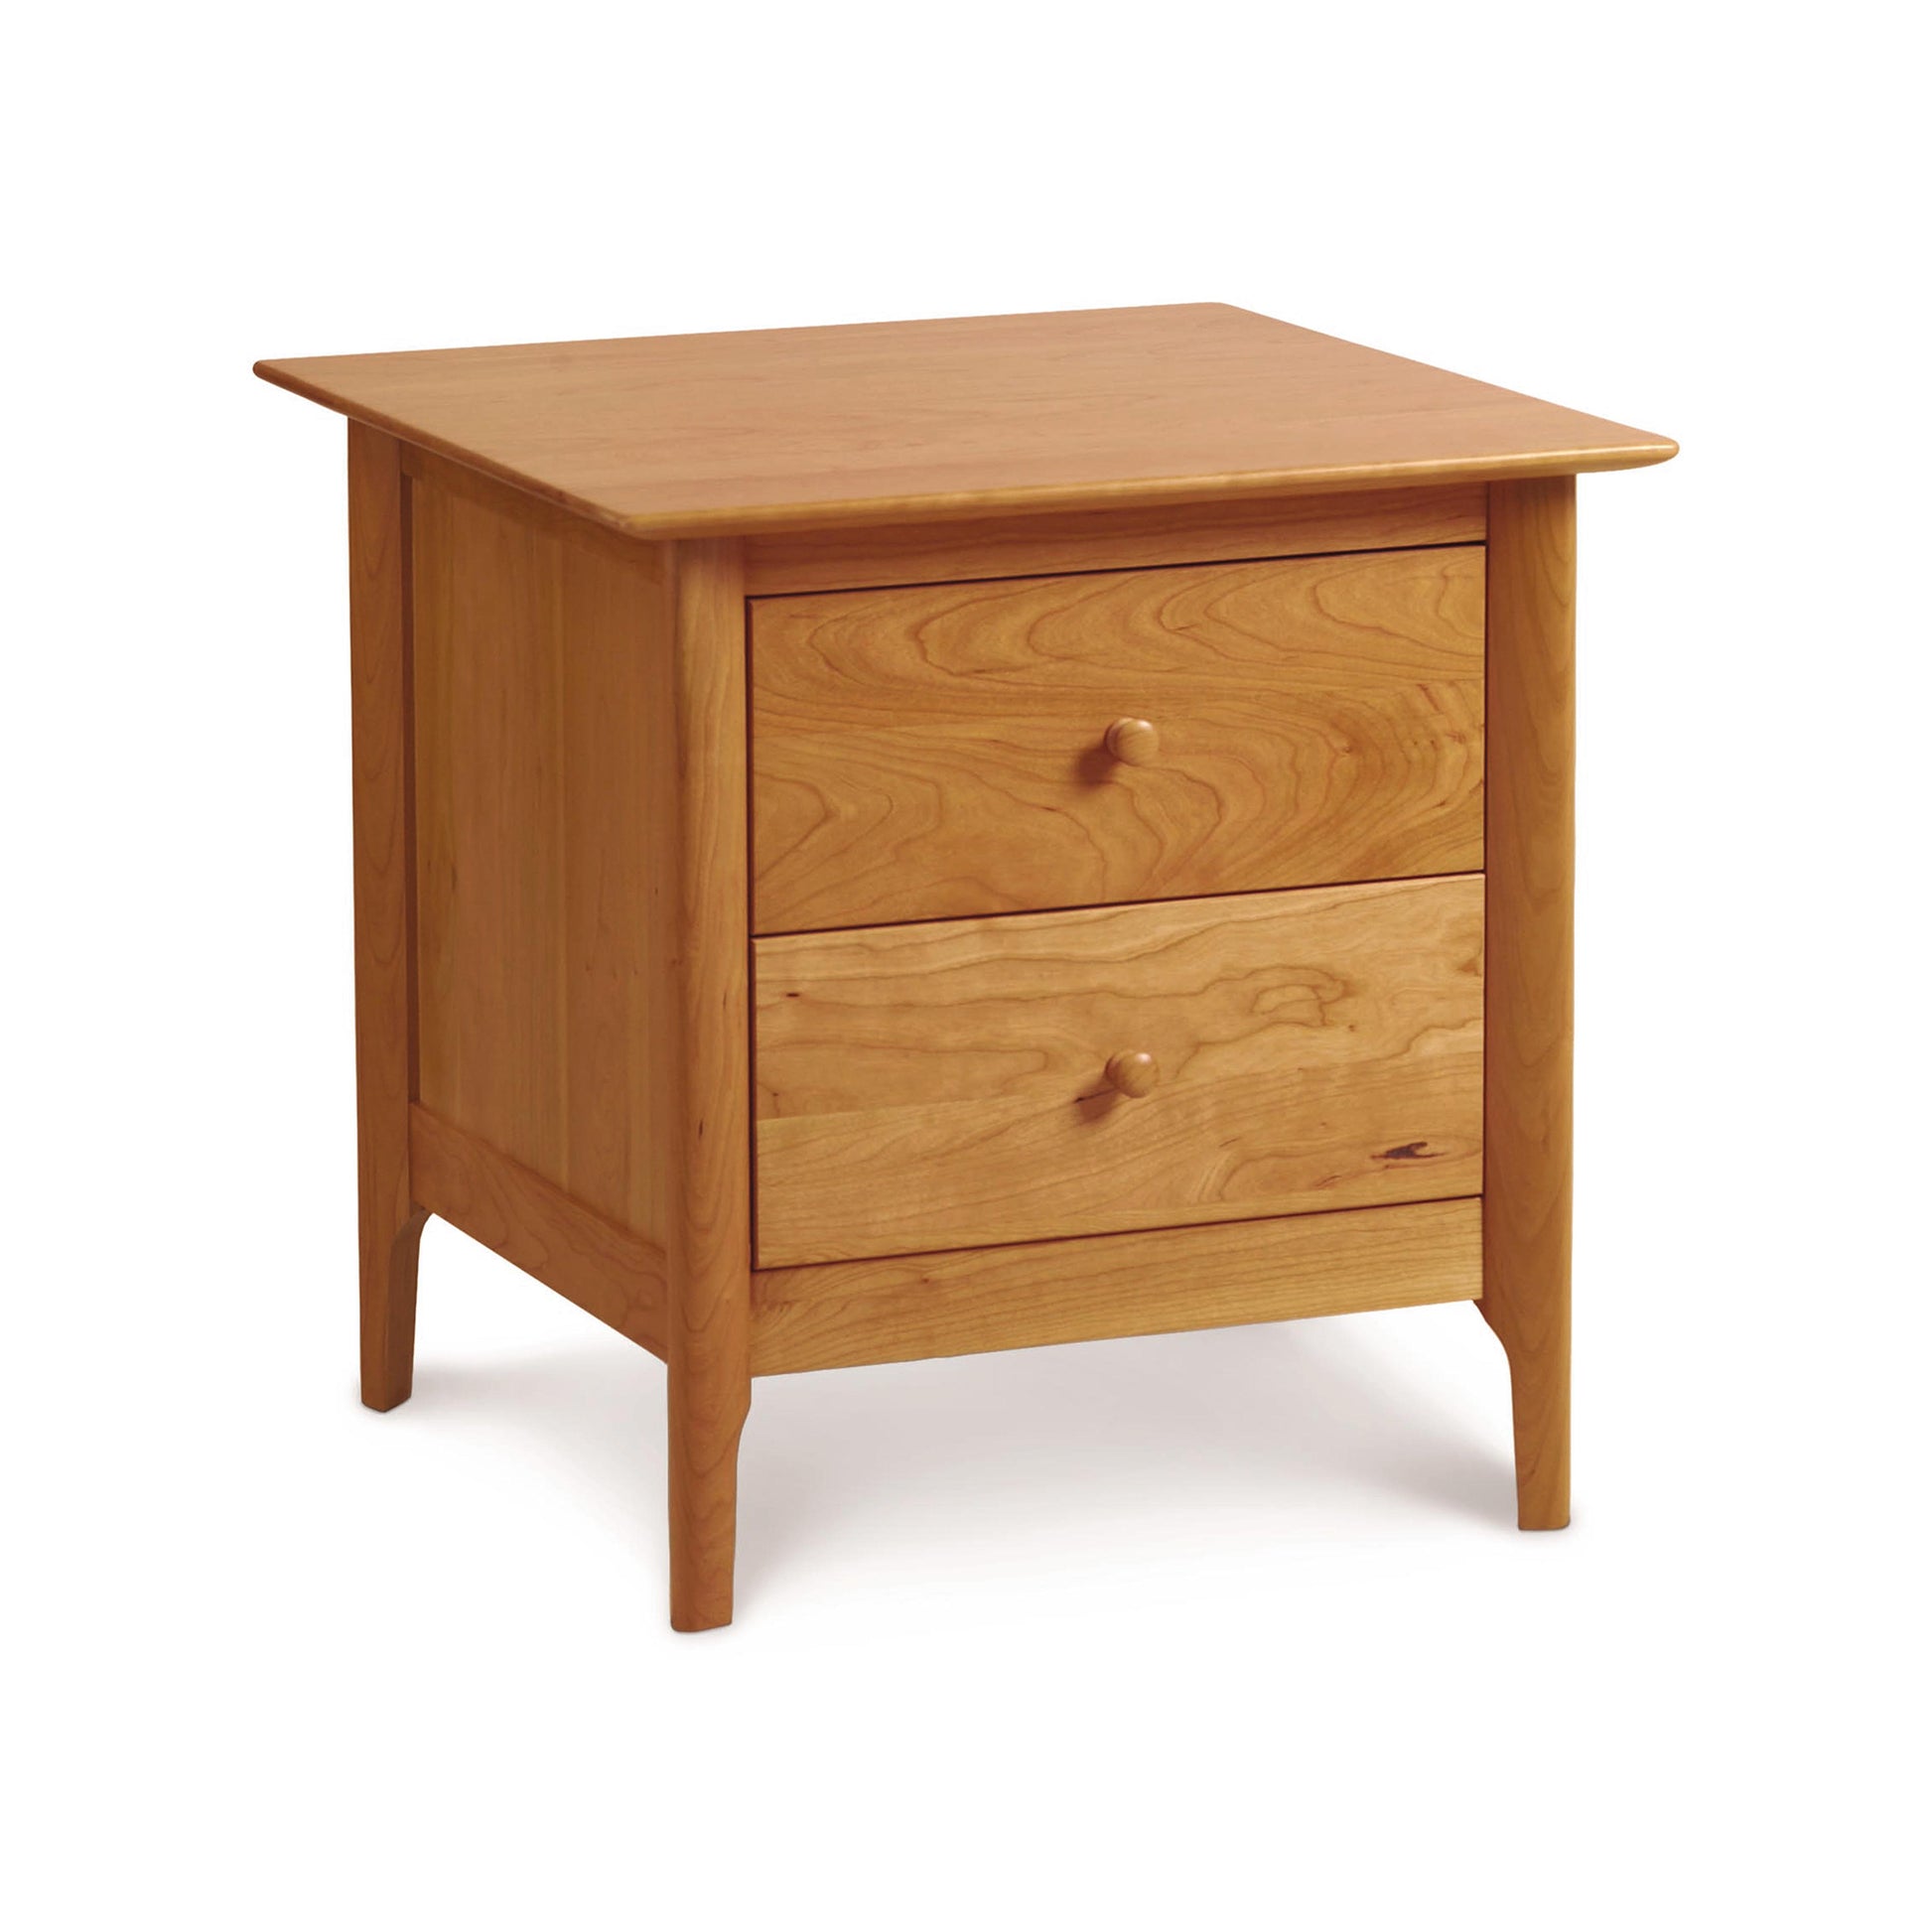 Sarah 2-Drawer Nightstand by Copeland Furniture, isolated on a white background.